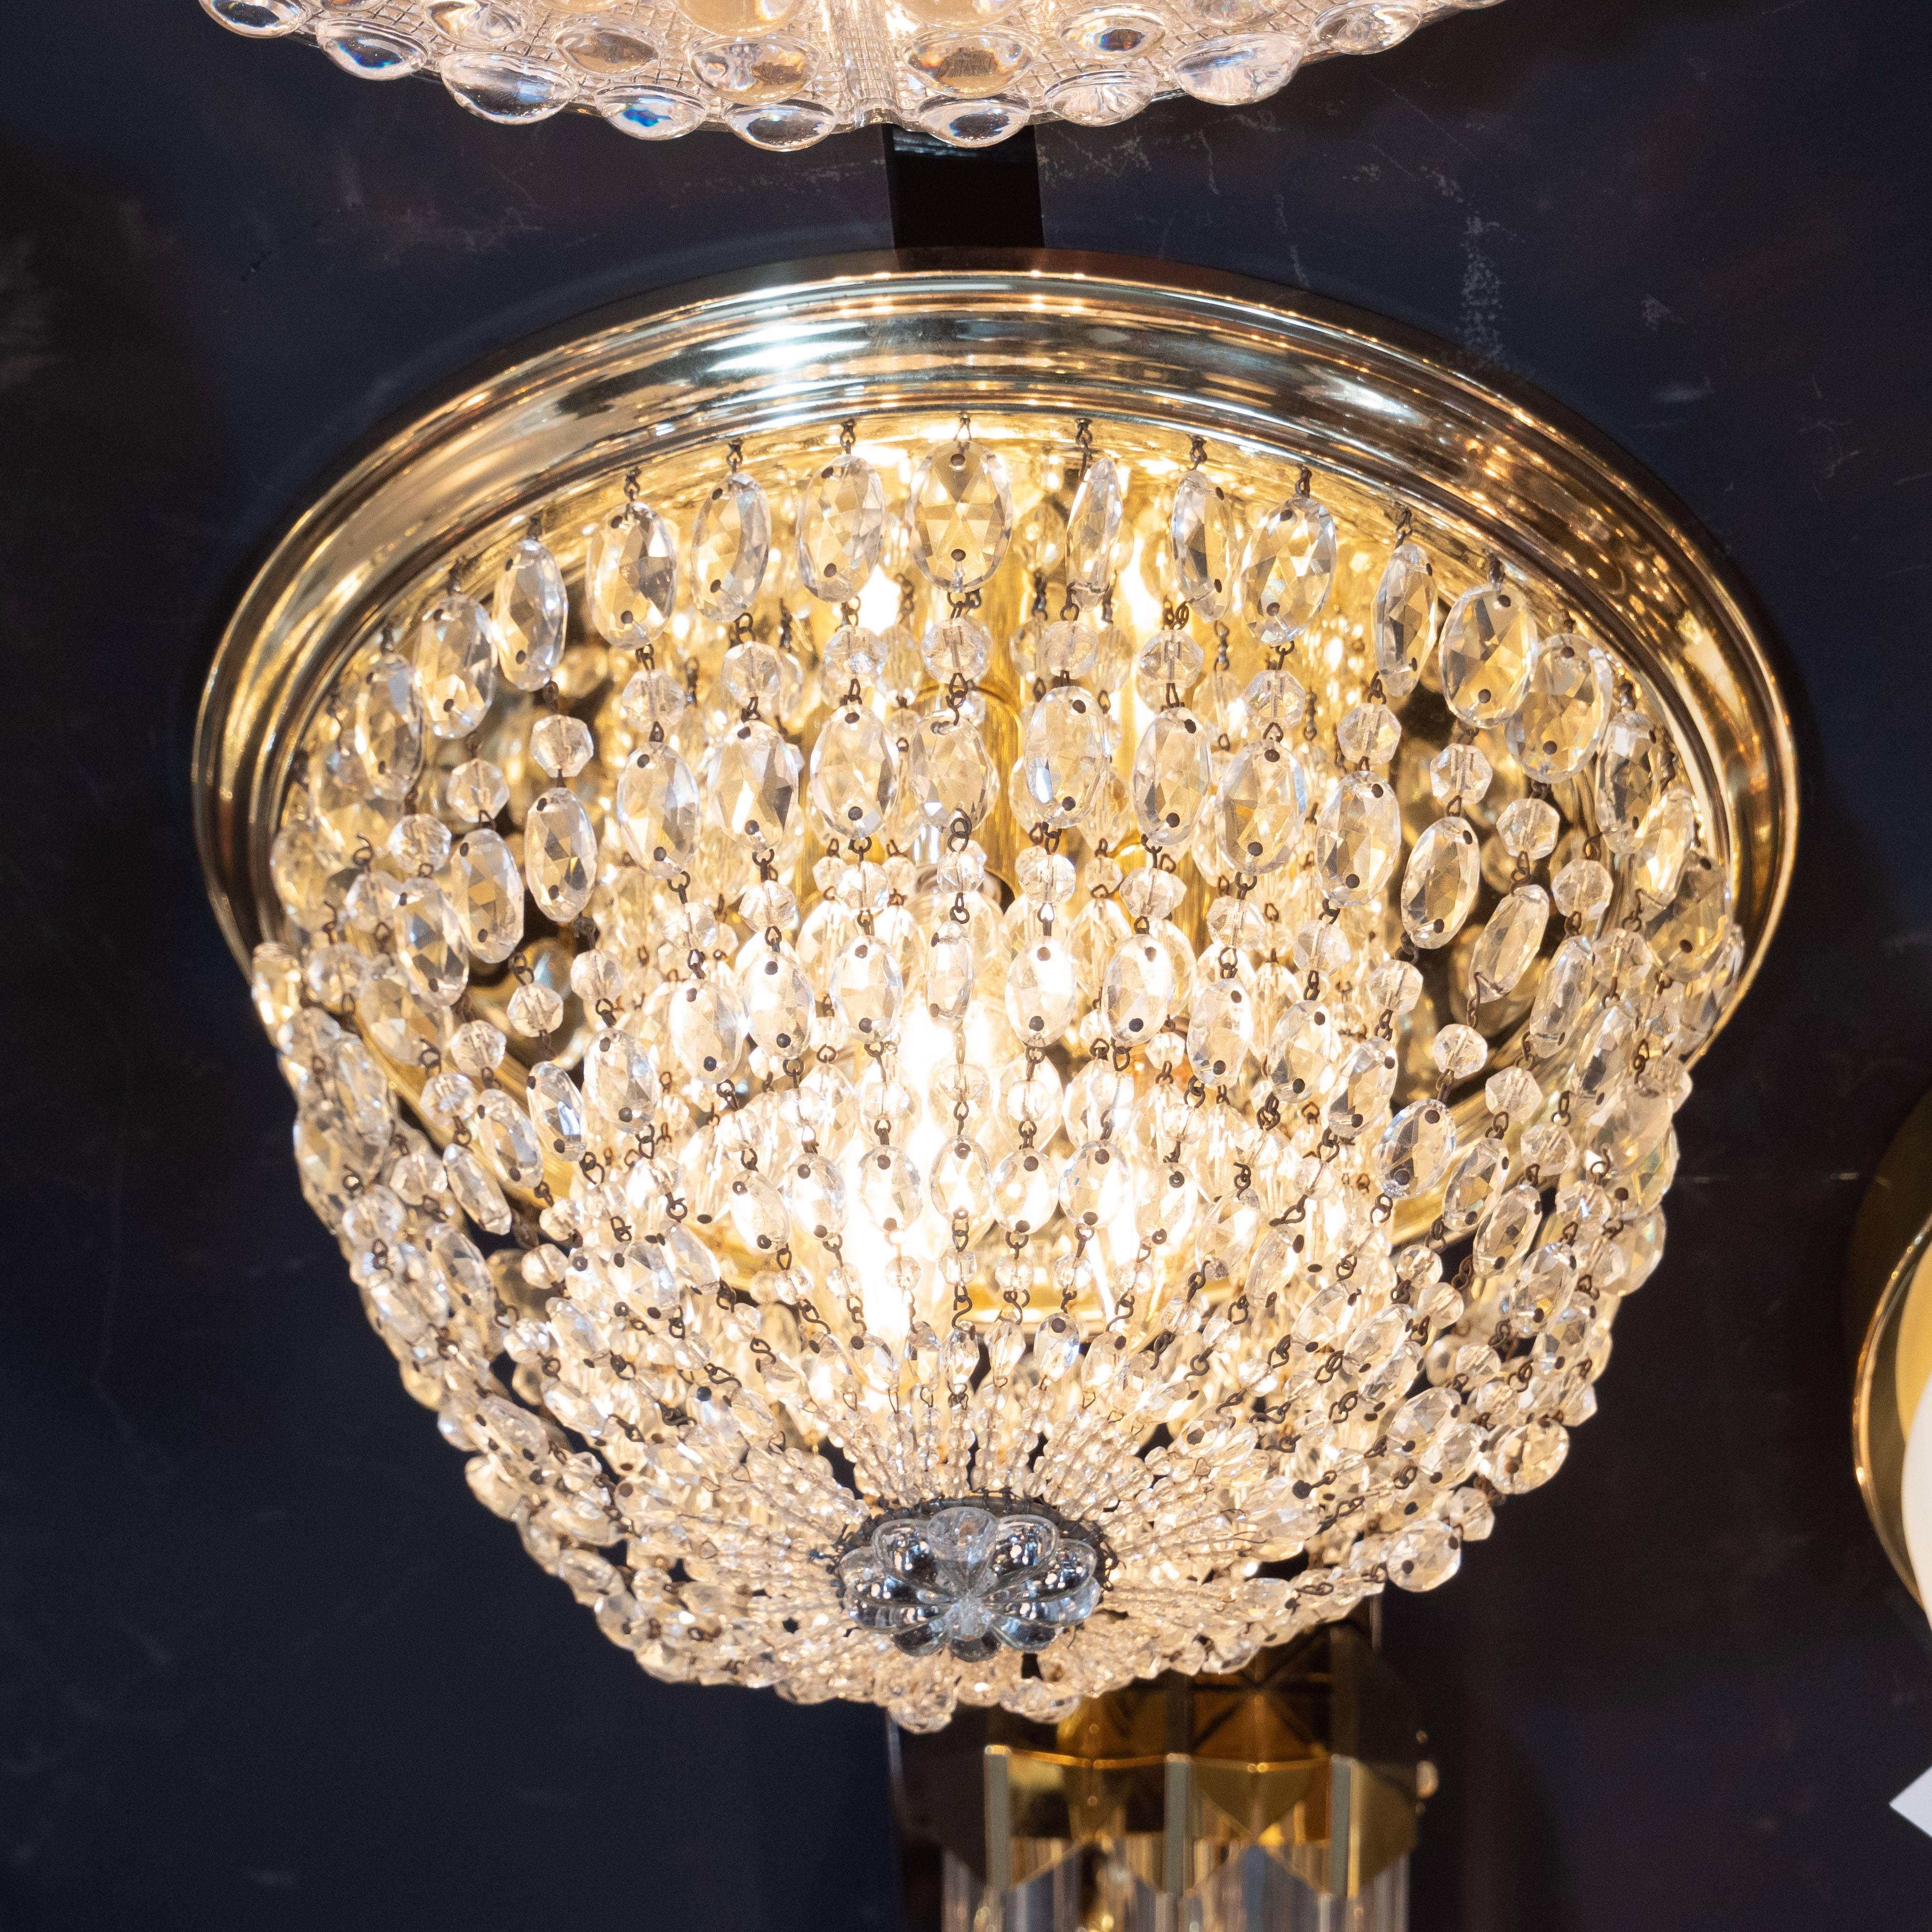 This glamorous and elegant Hollywood flush mount was realized in the United States, circa 1945. It features a stepped skyscraper style brass base from which an abundance of strands of cut crystal elegantly drape downwards, secured in the center of